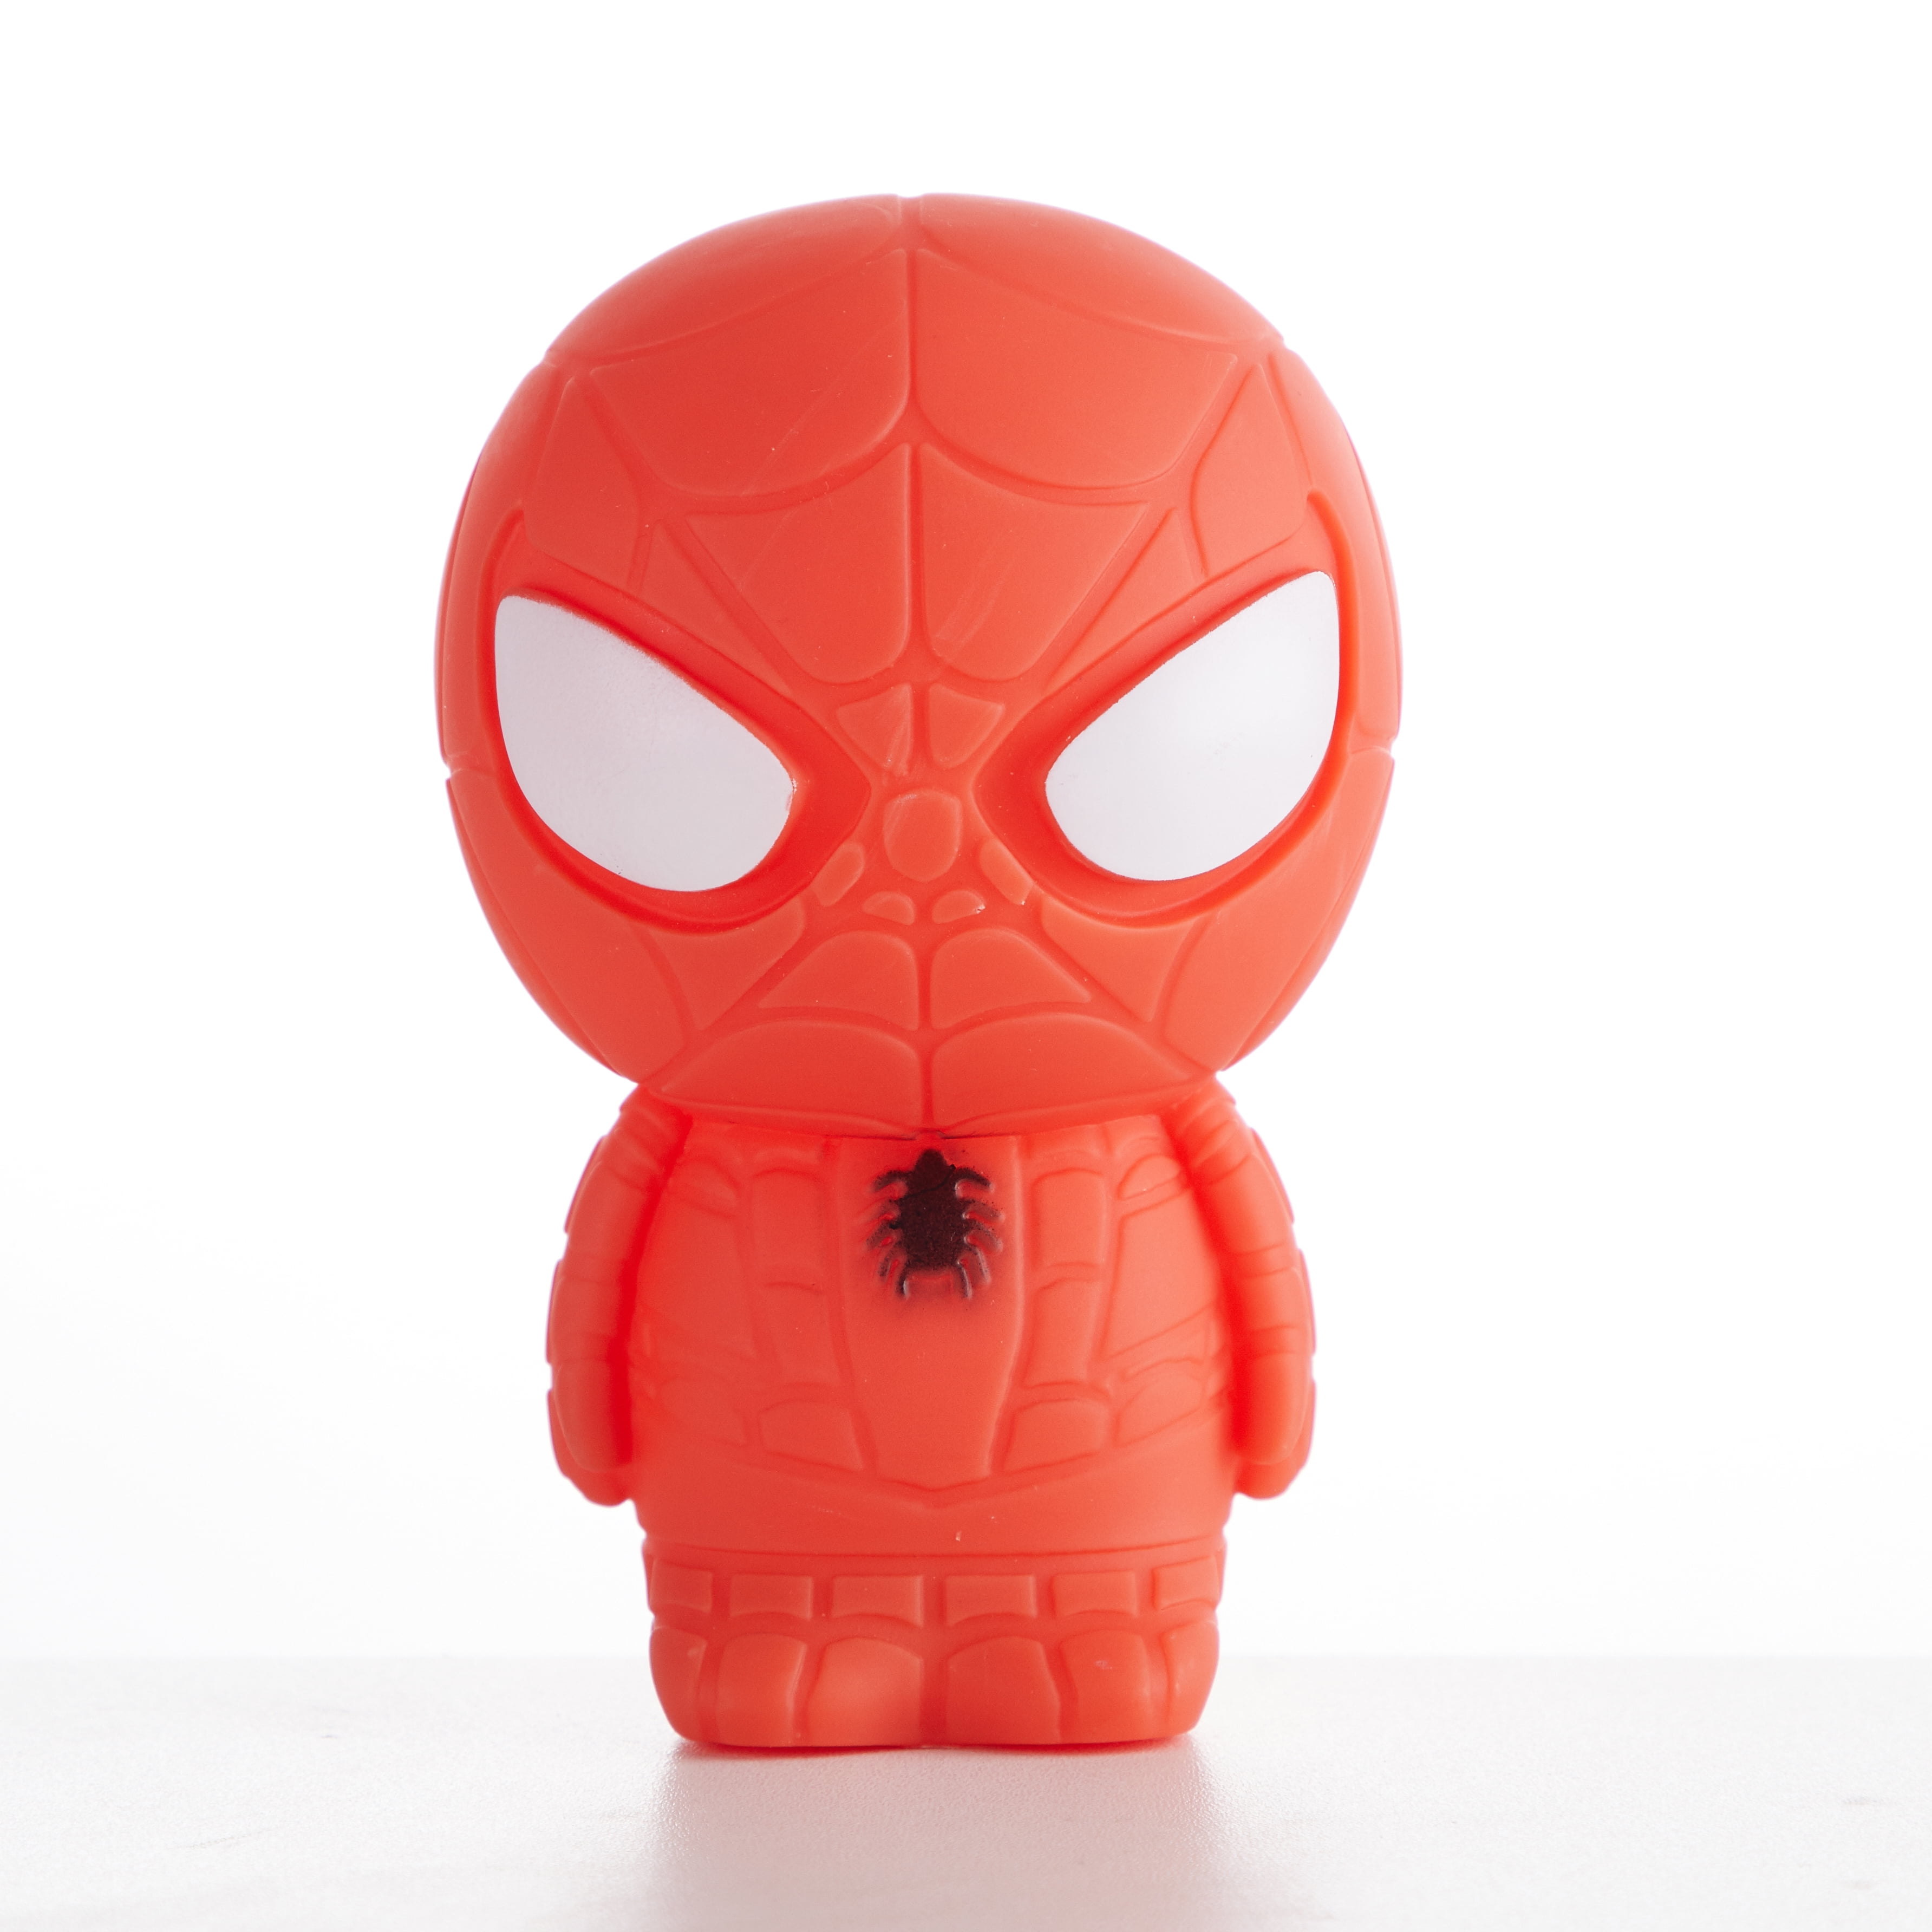 Marvel Spiderman 3D Mood Light with 30 Minute Timer, Red, 6"H x 4"W